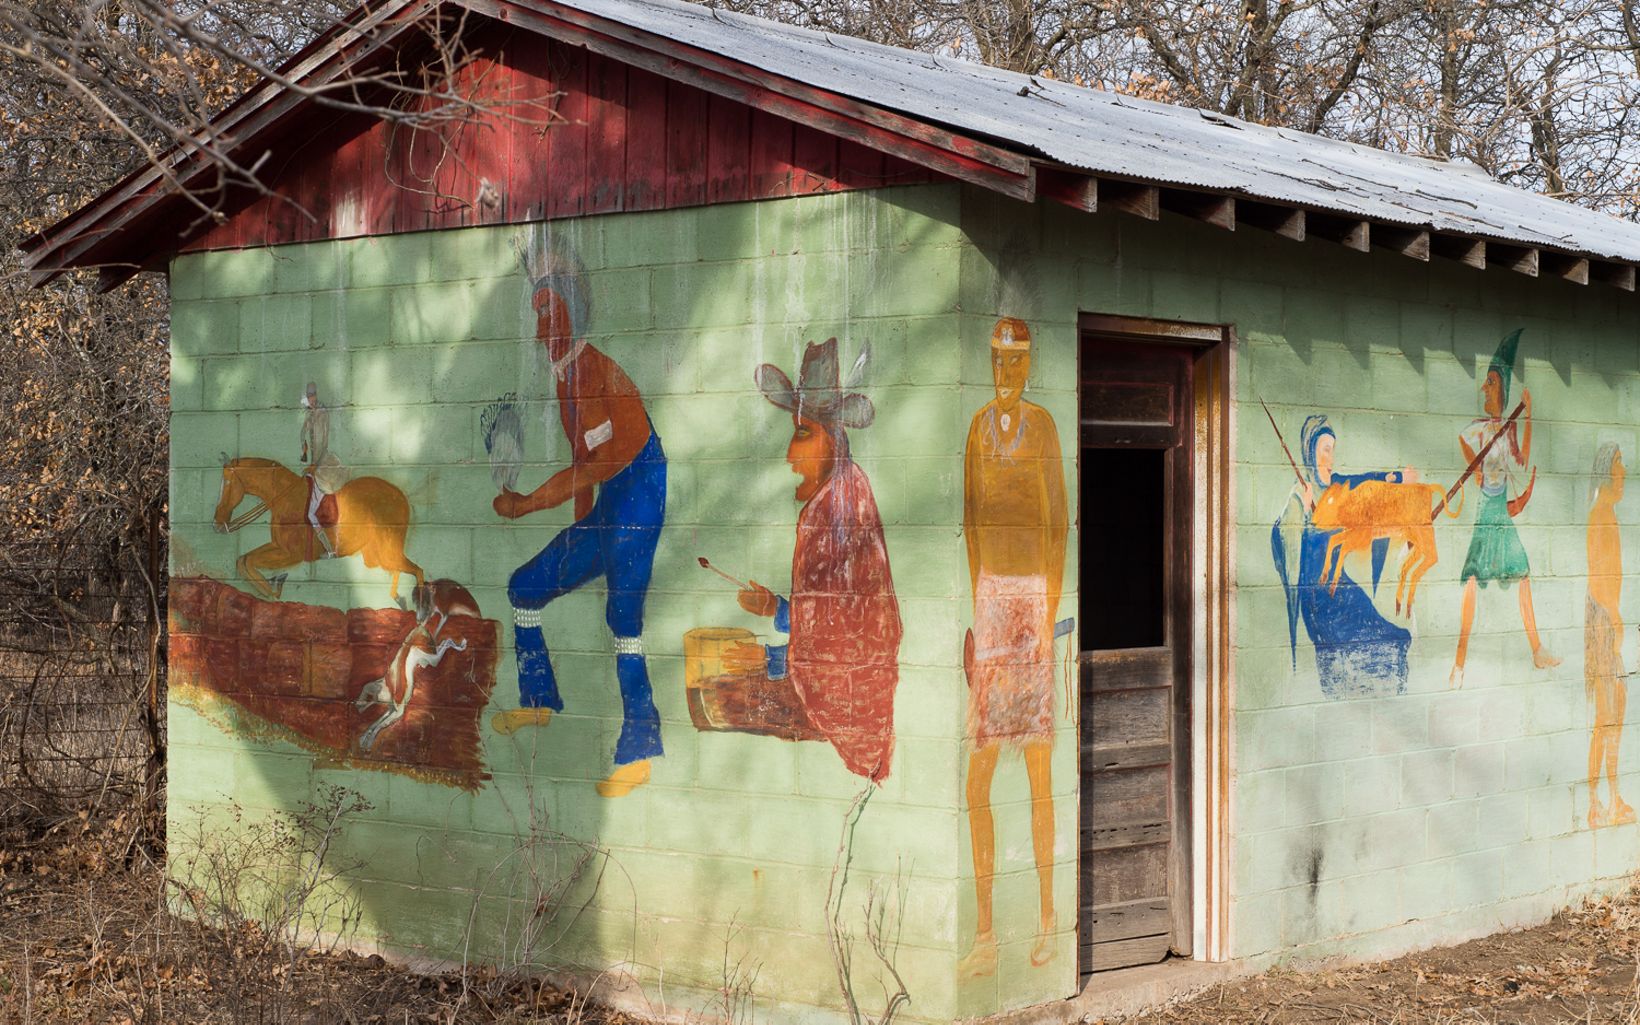 Mathews painted his depiction of the history of man on his outbuilding near the cabin.